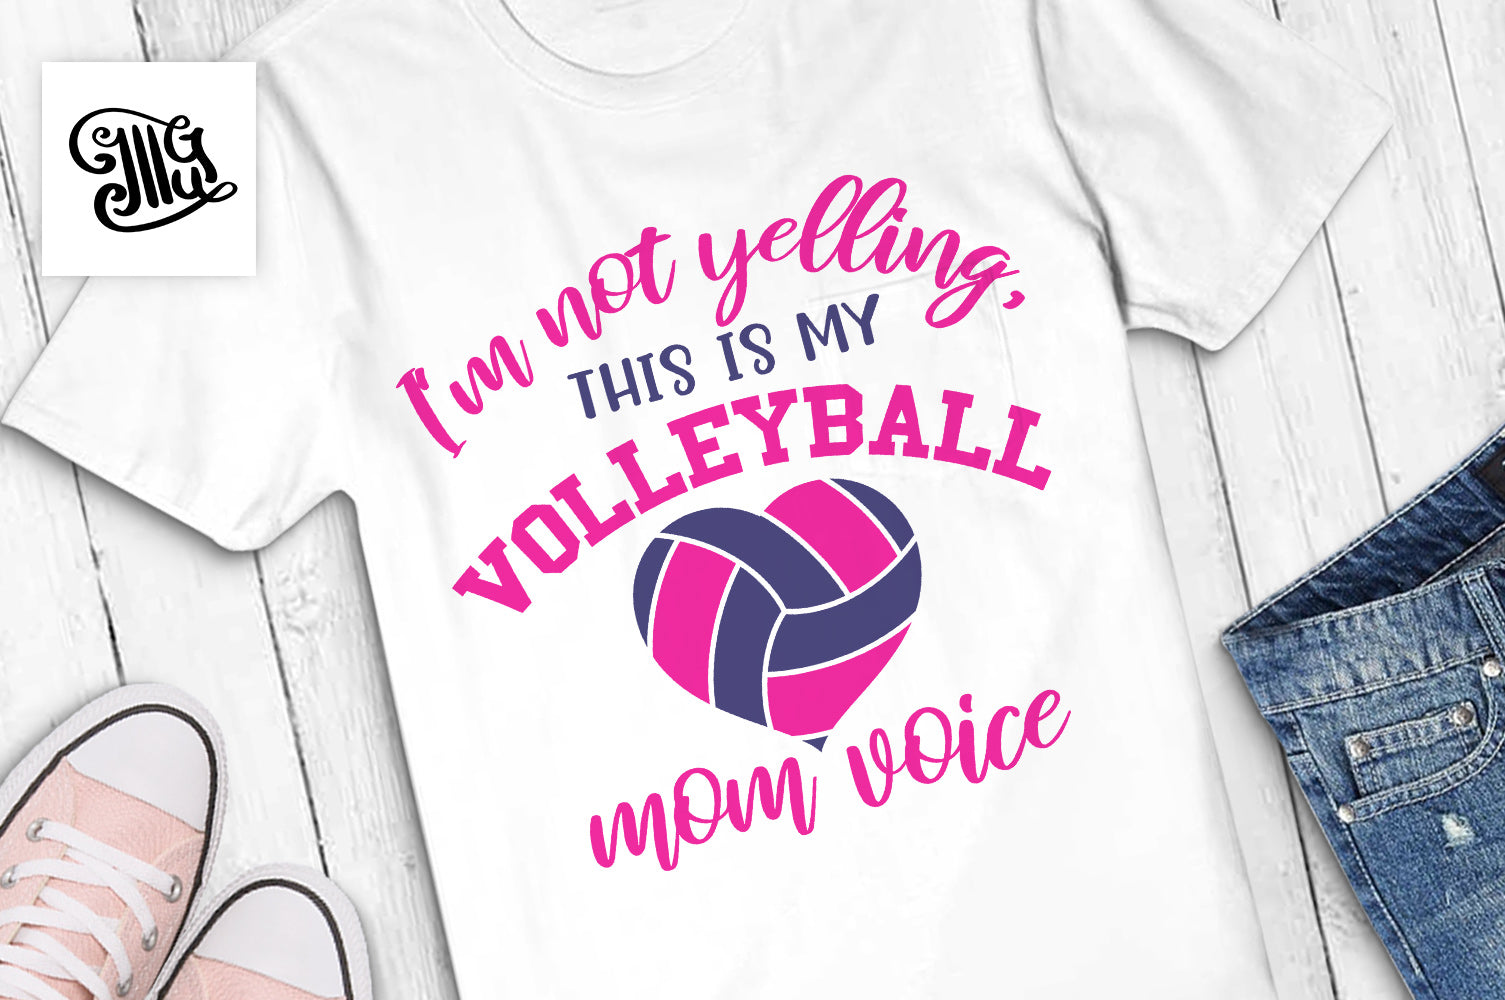 Download Volleyball Mom Split Volleyball Svg Diy Volleyball Team Name Monogram Floral Frame Volleyball Svg Volleyball Team Svg Volleyball Svg Clip Art Art Collectibles